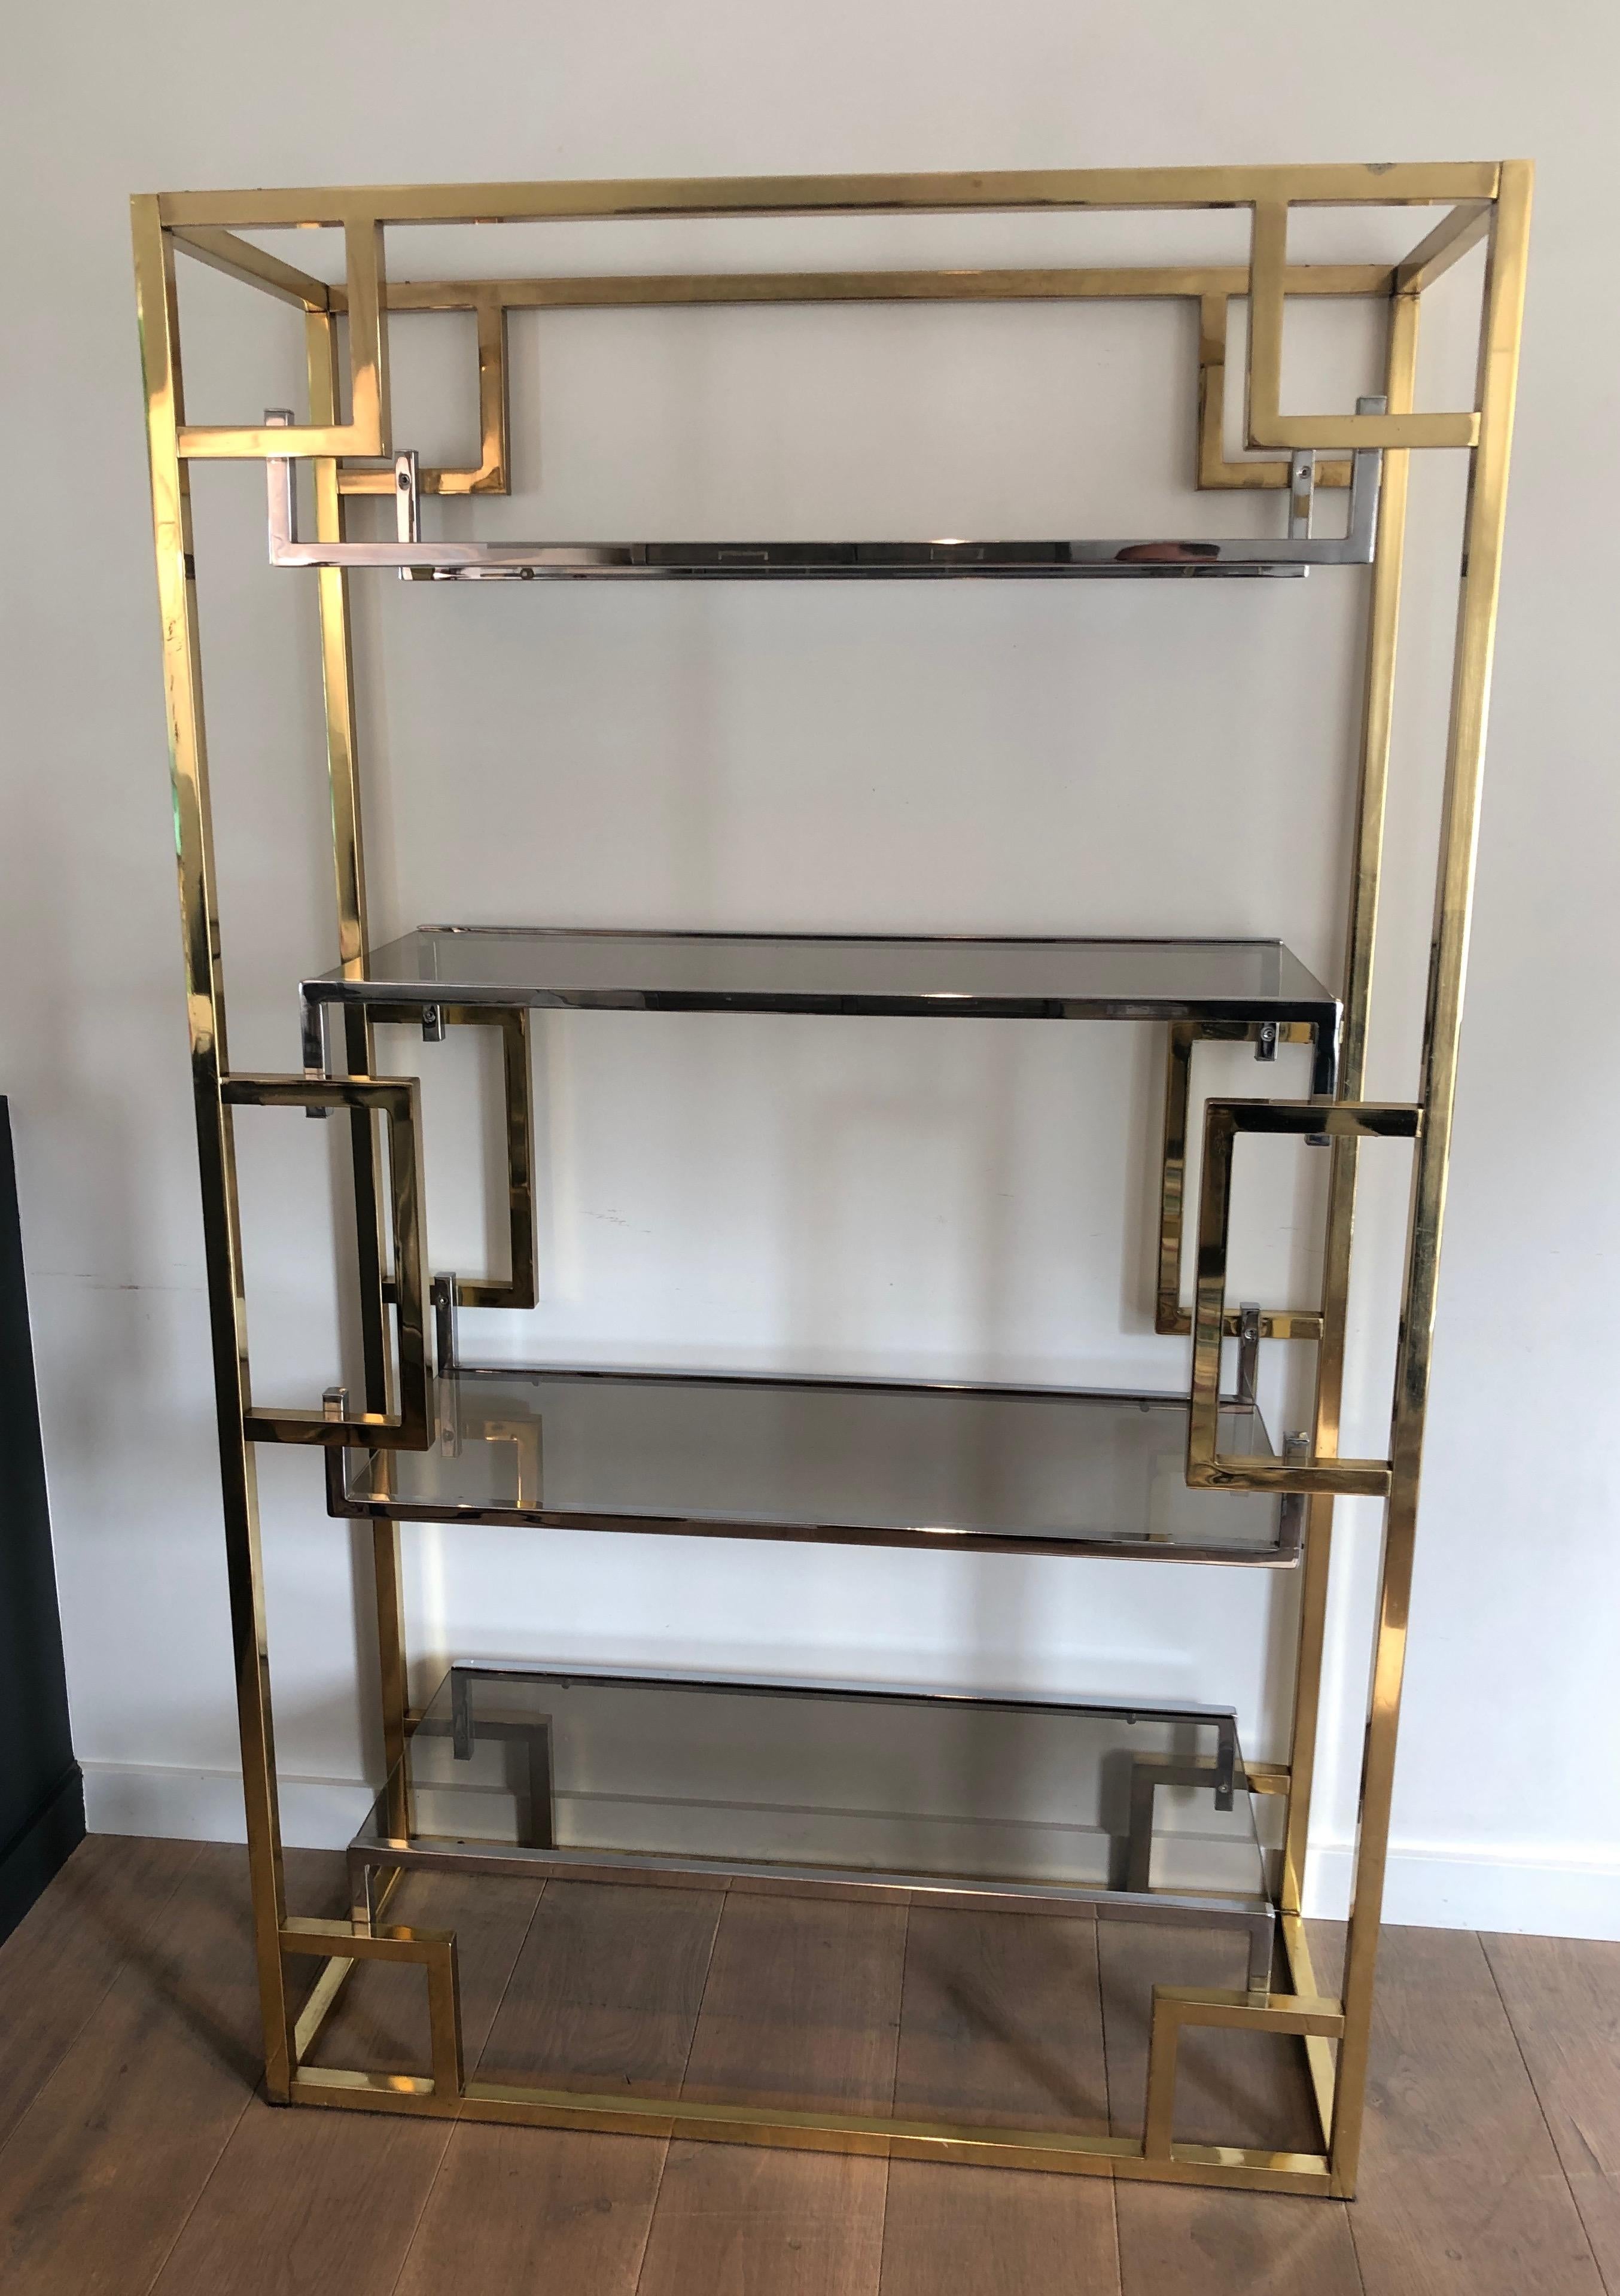 This beautiful shelves unit is made of chrome and gilt chrome. This is a French work in the style of famous designer Willy Rizzo. Circa 1970